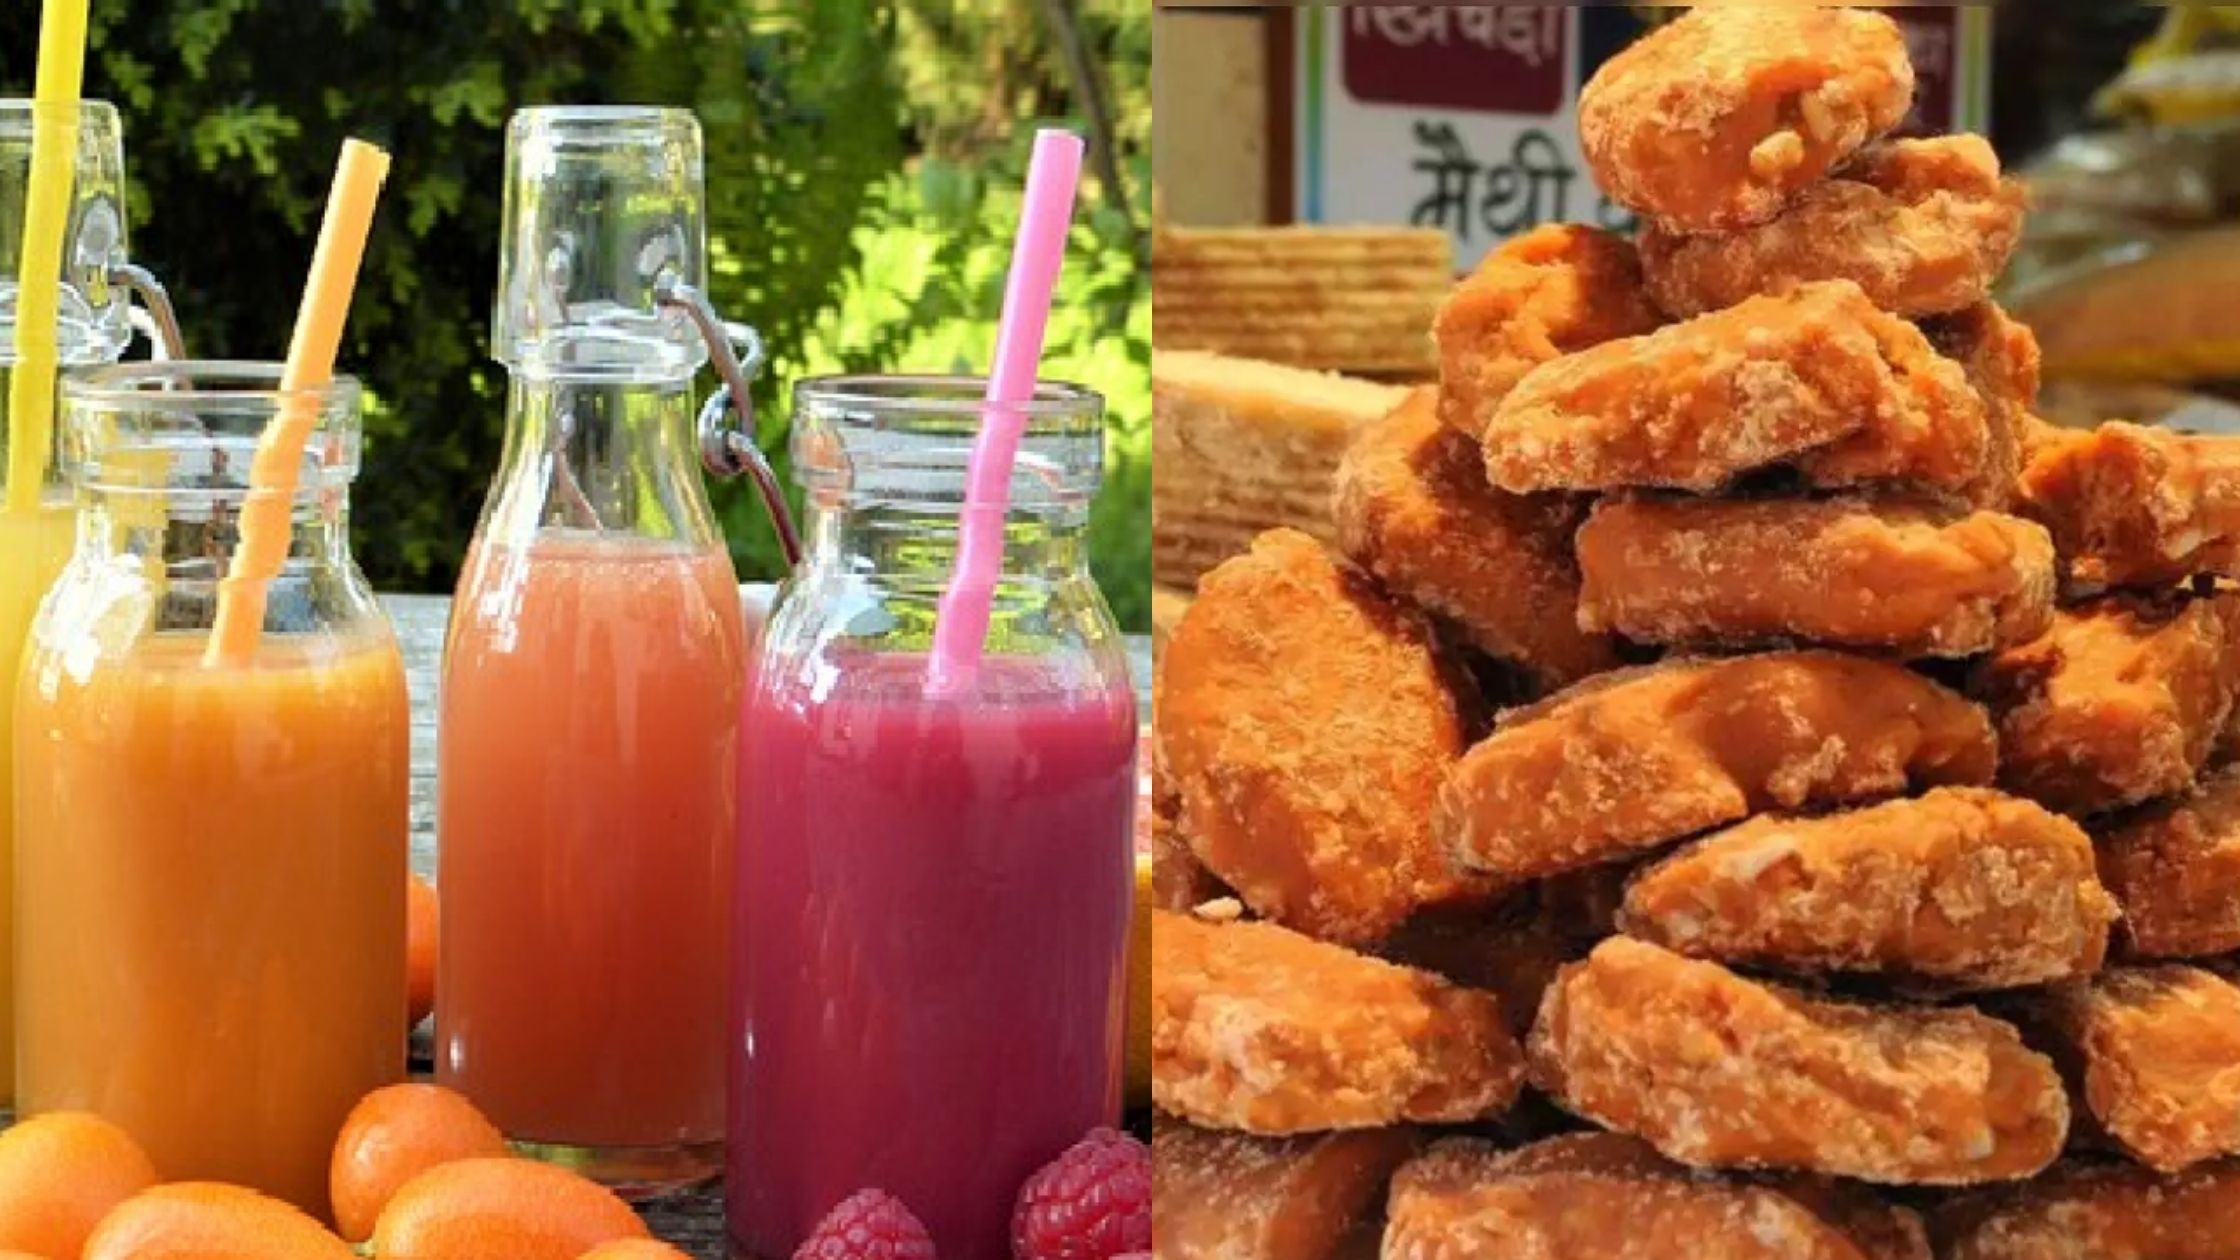 Investment proposals came in Fruit Juice and Jaggery Industries